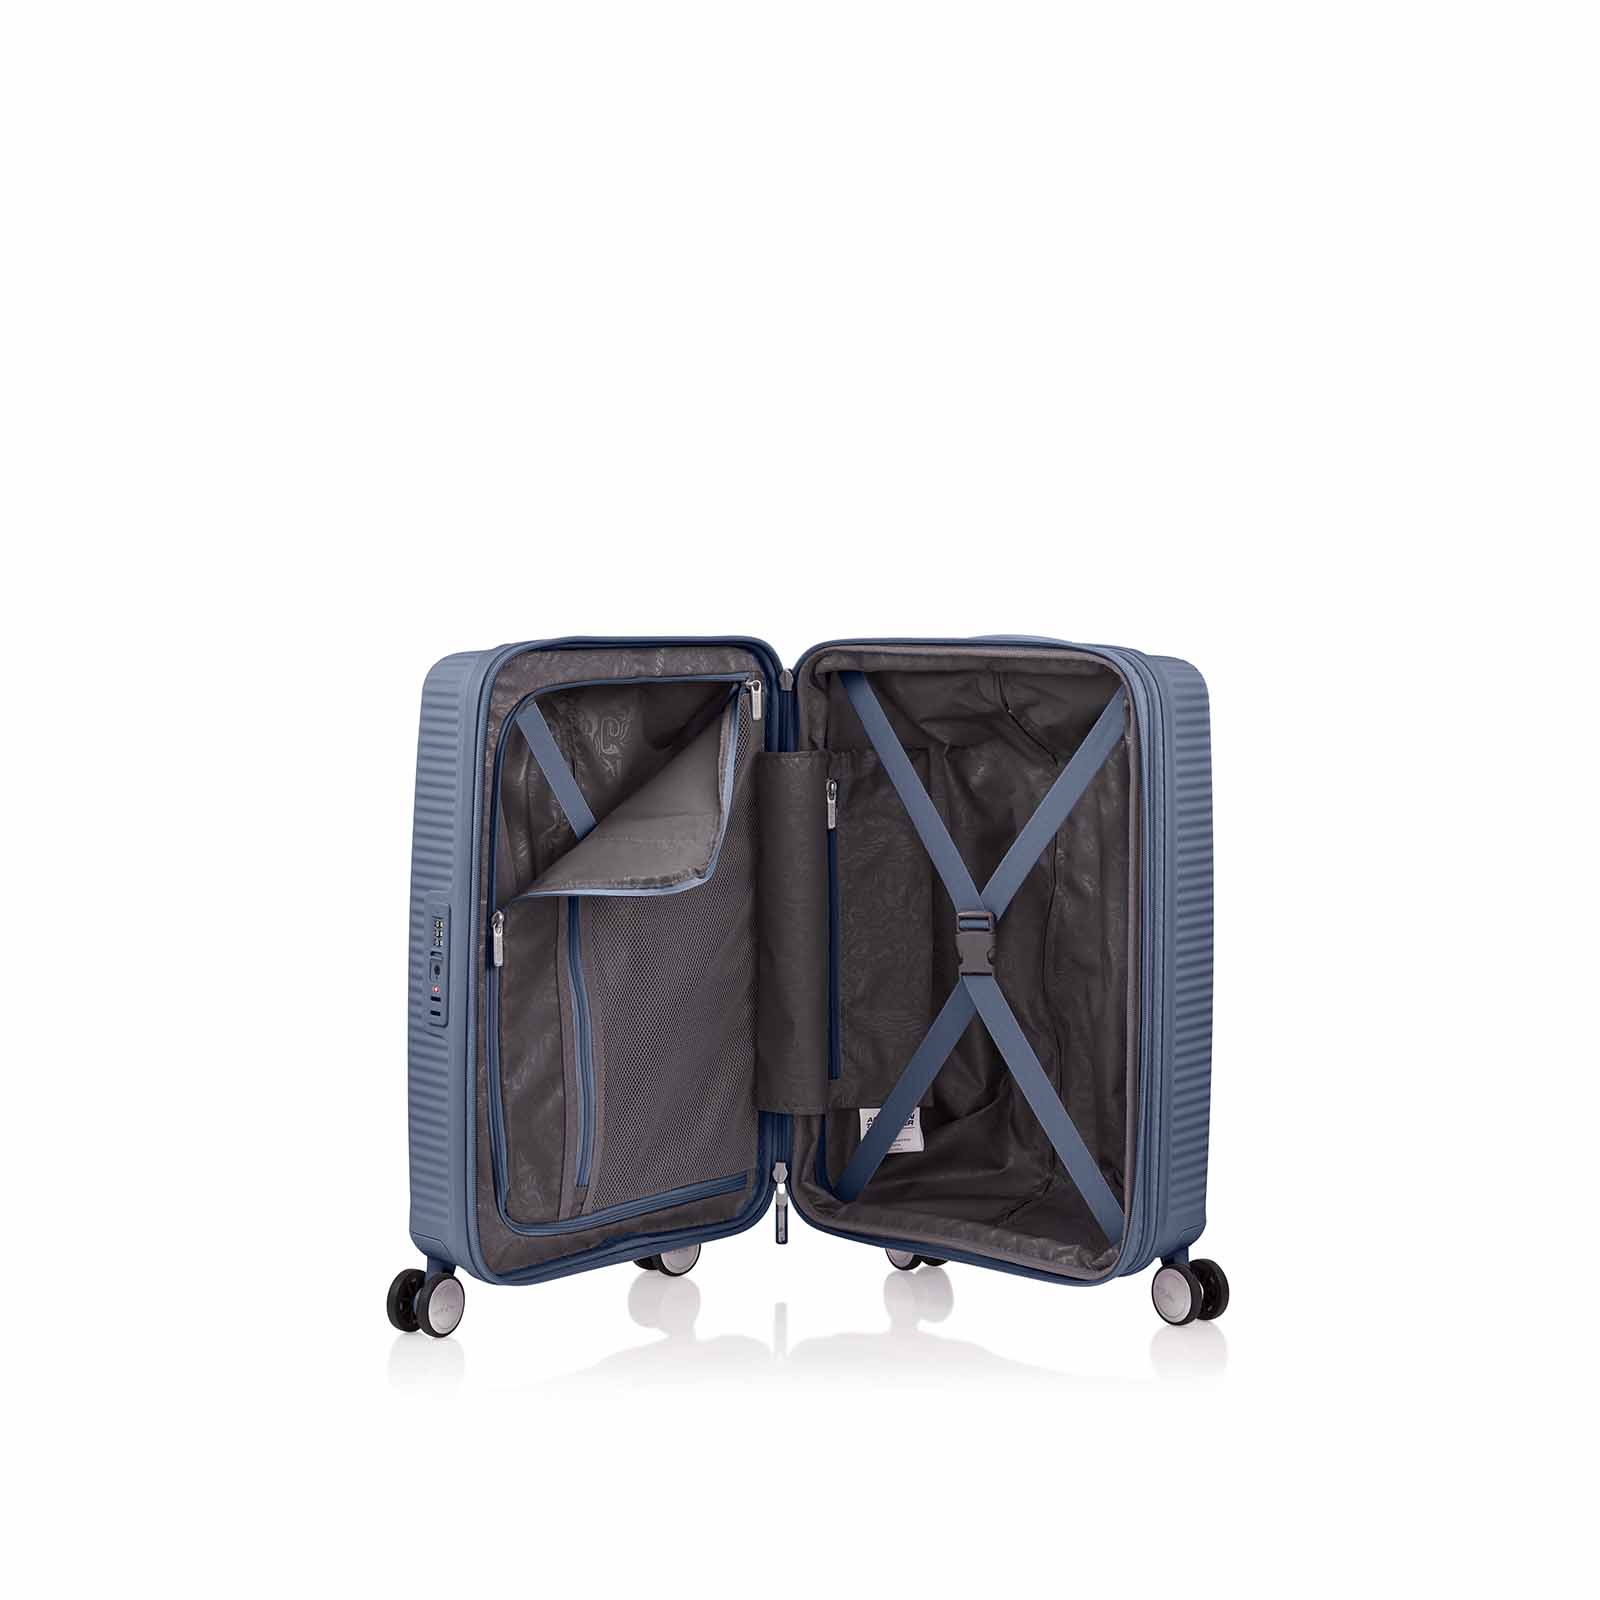 American-Tourister-Curio-2-55cm-Carry-On-Suitcase-Stone-Blue-Open